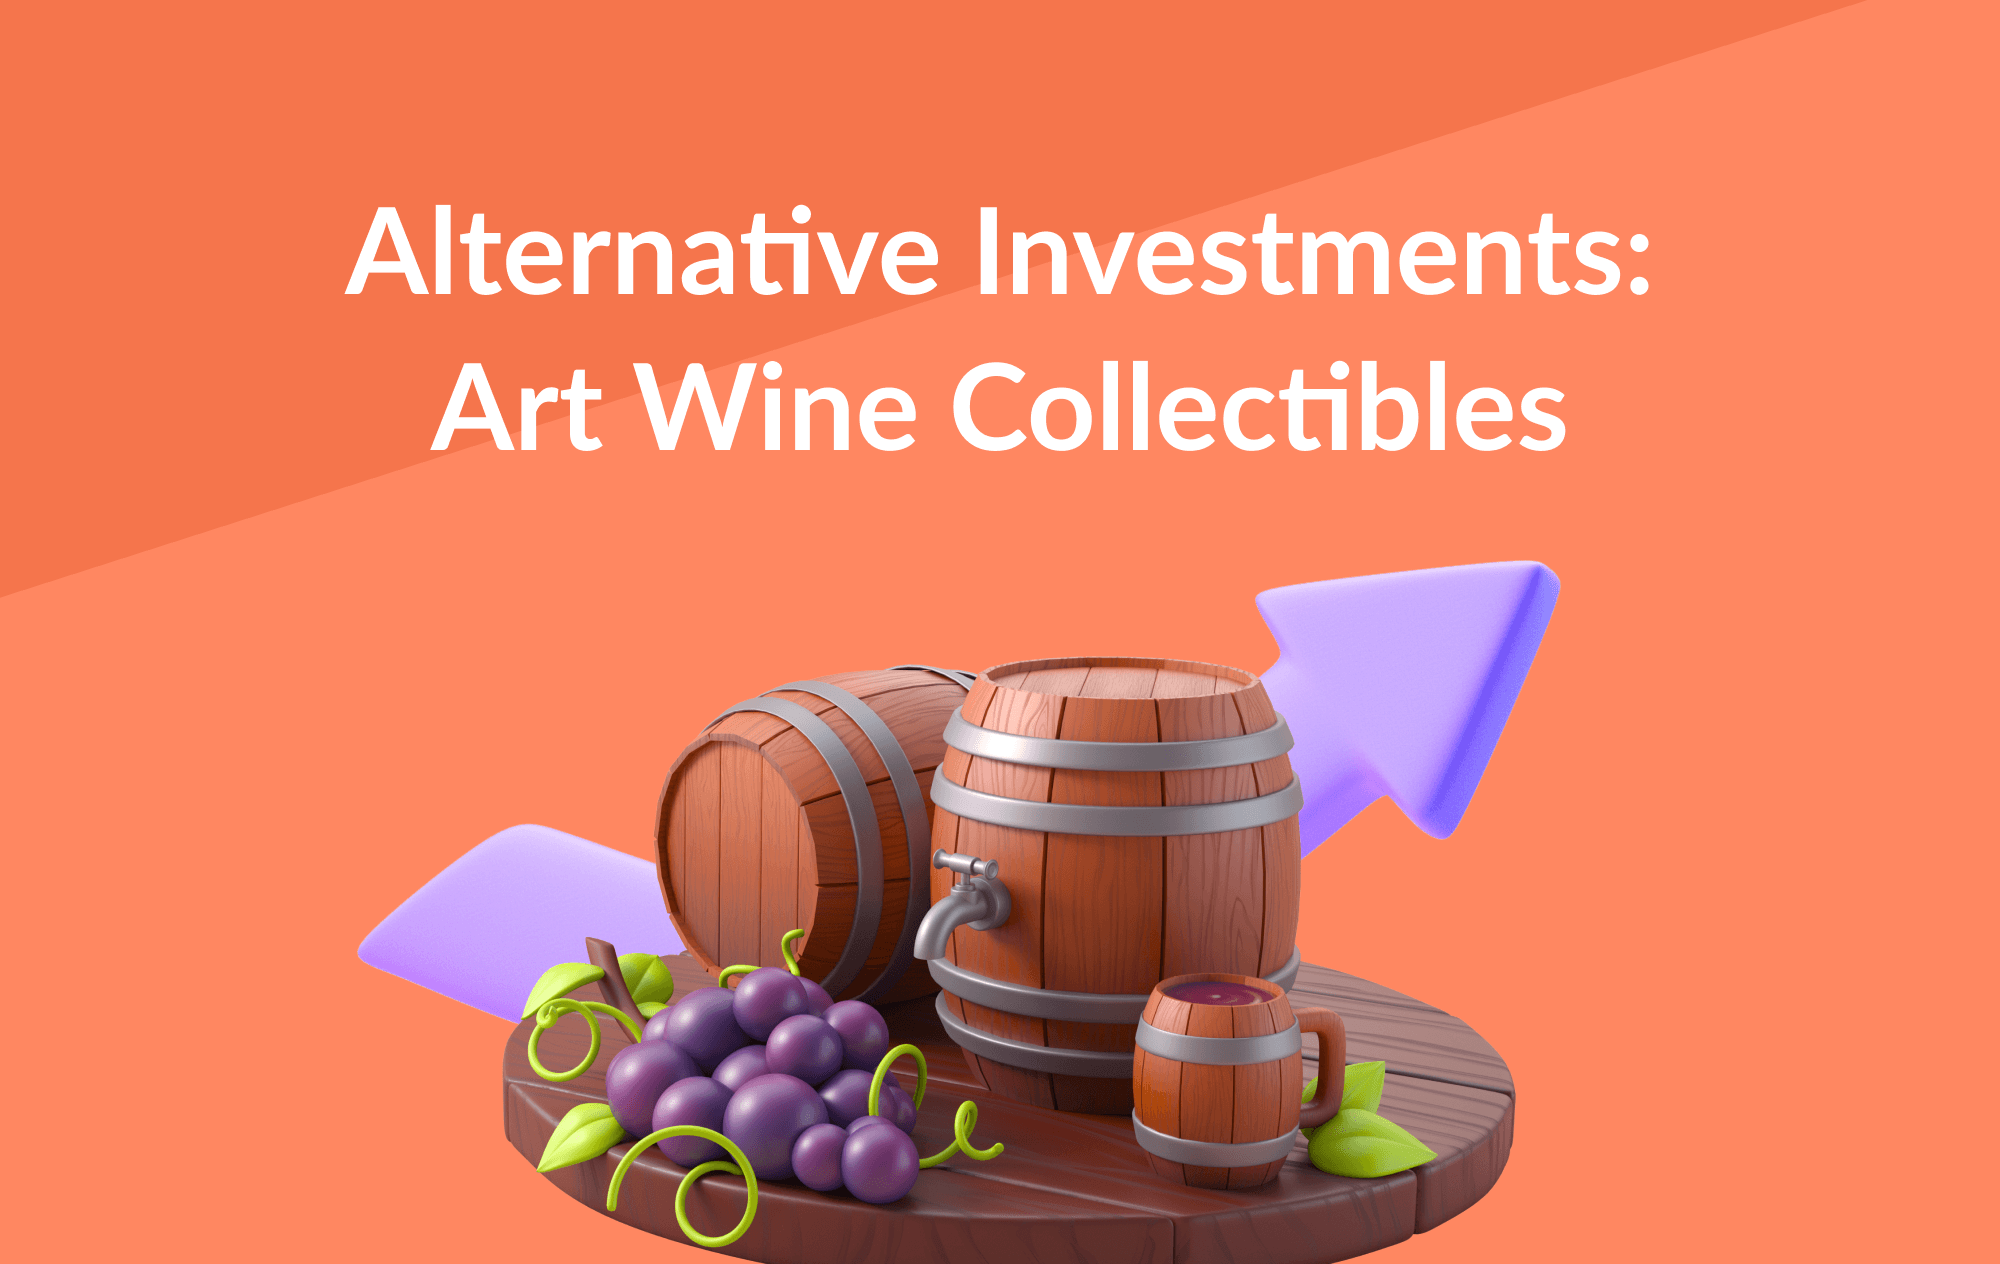 The Growing Popularity of Alternative Investments: Art, Wine, and Collectibles